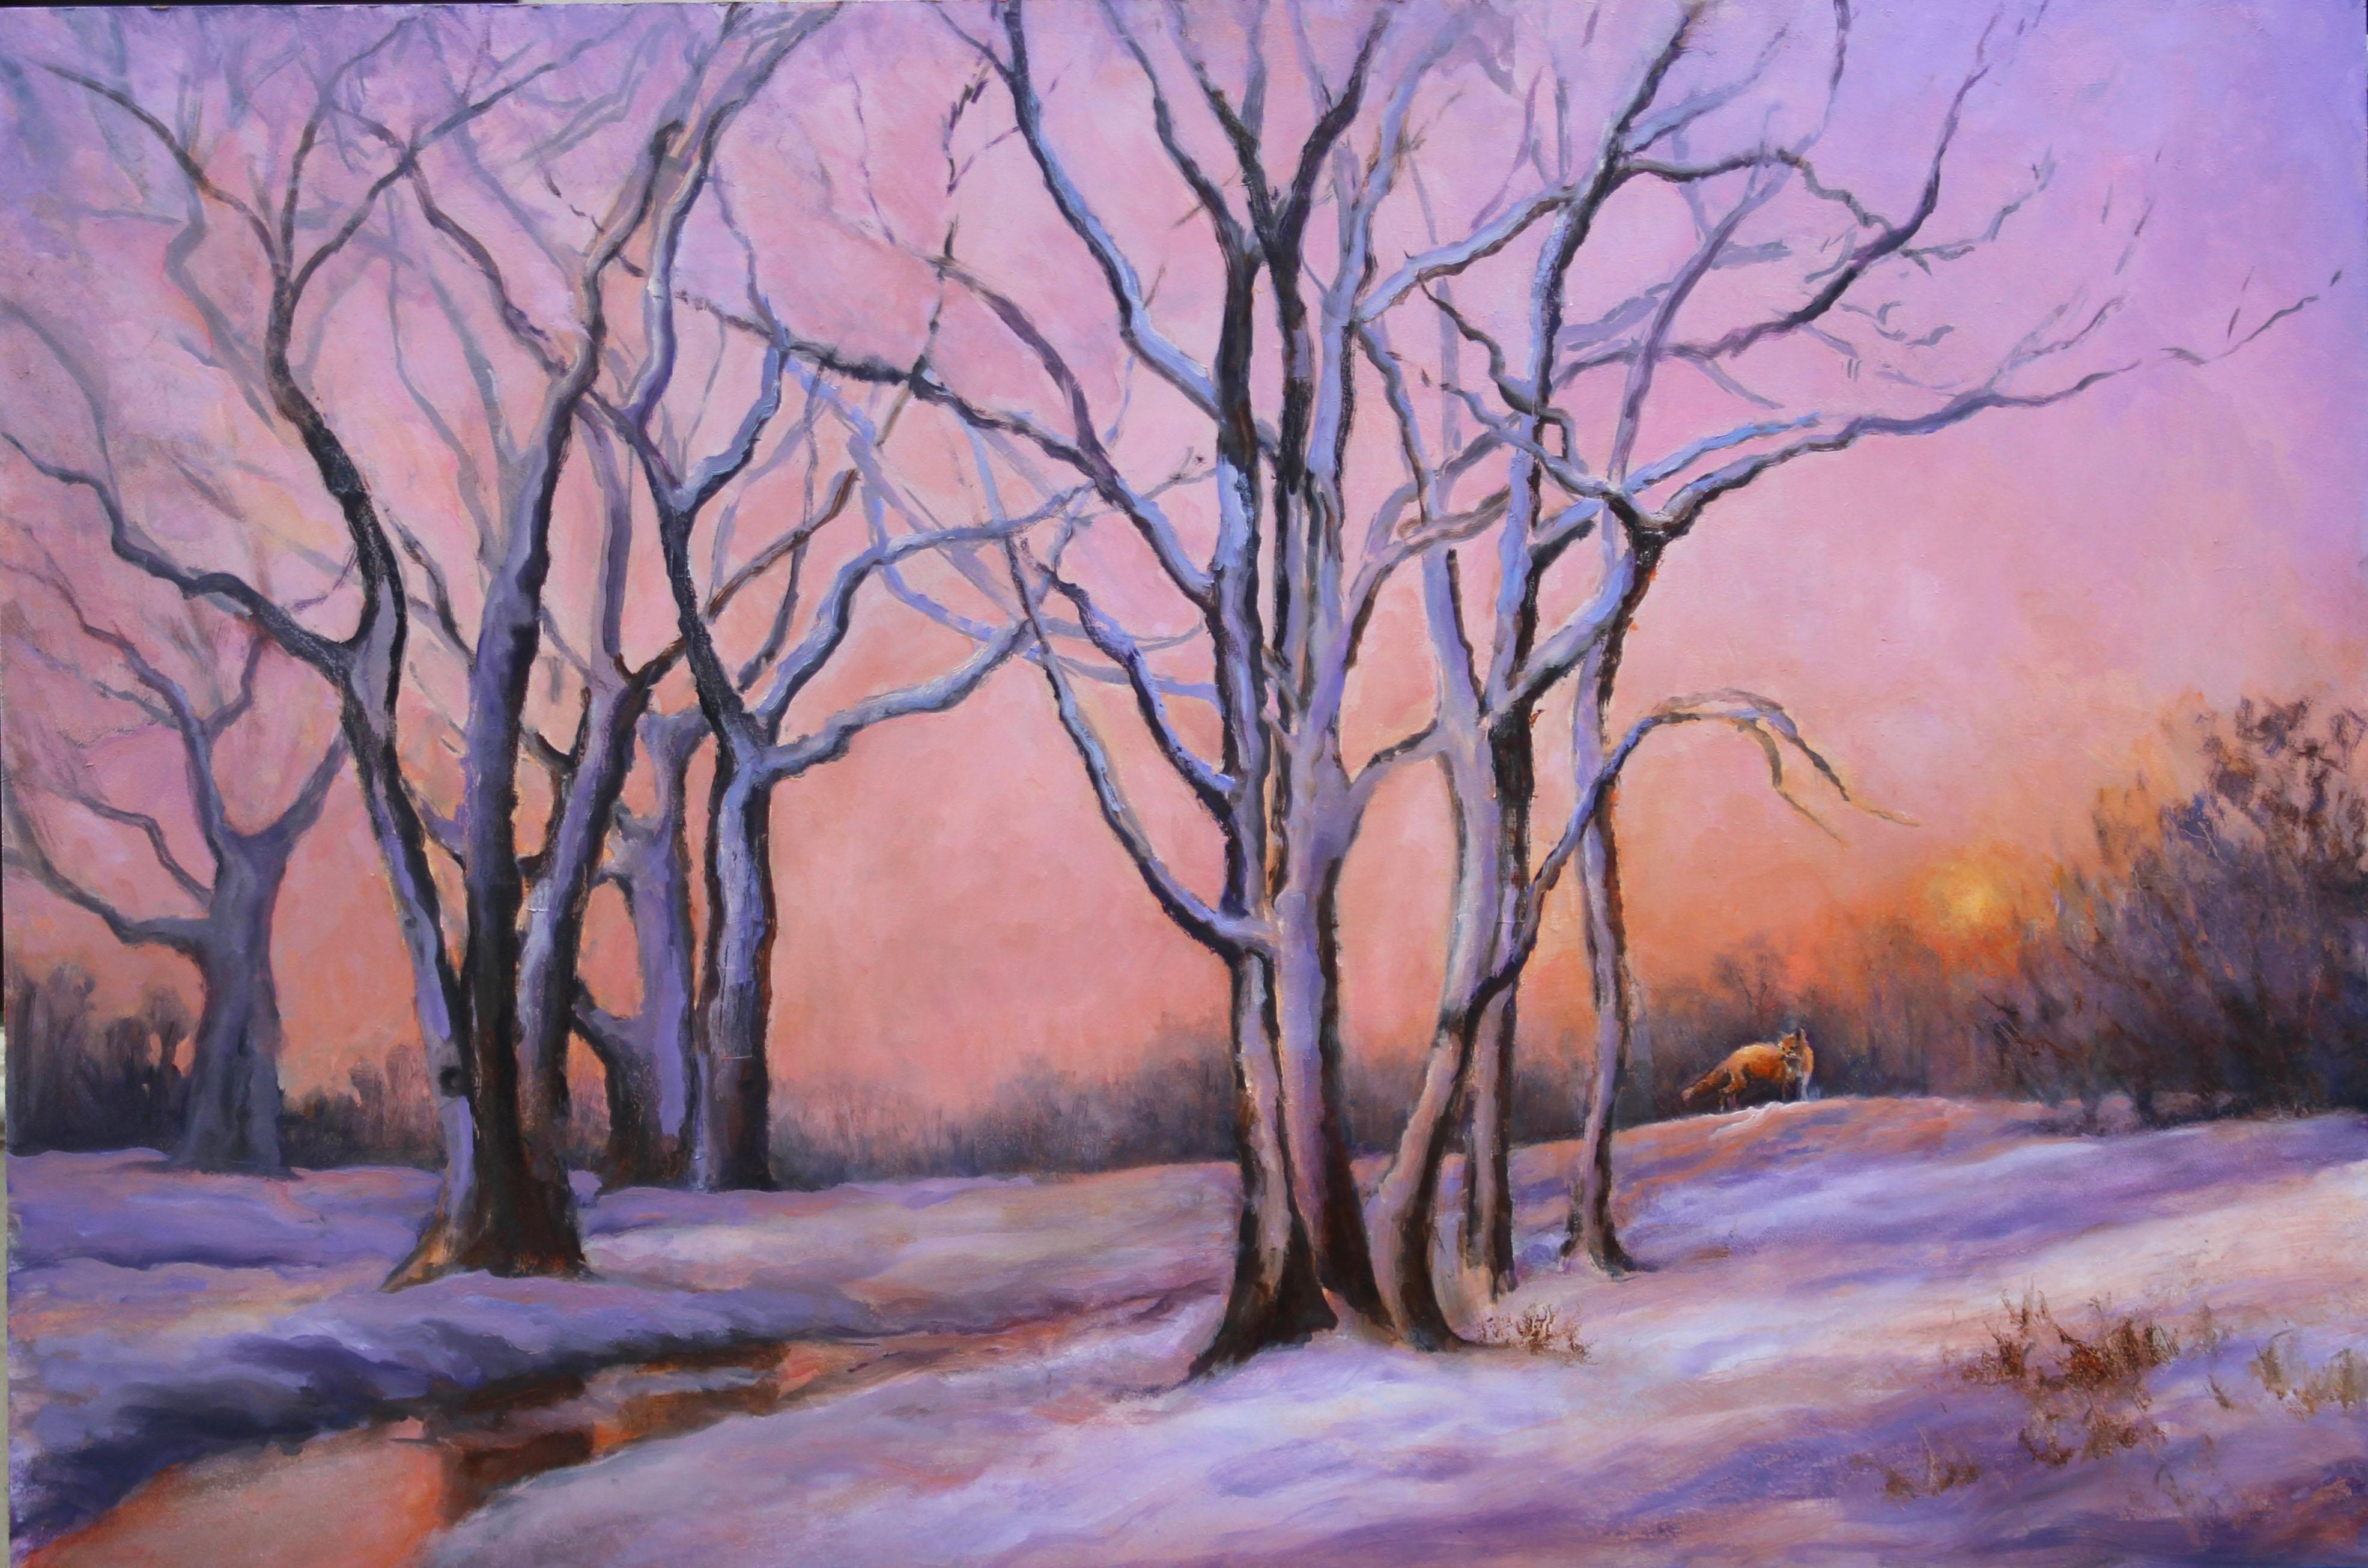 Beth Carlson Landscape Painting - Large Dramatic Colorful Evening Sunset in Chilly Snowy Landscape with Fox 